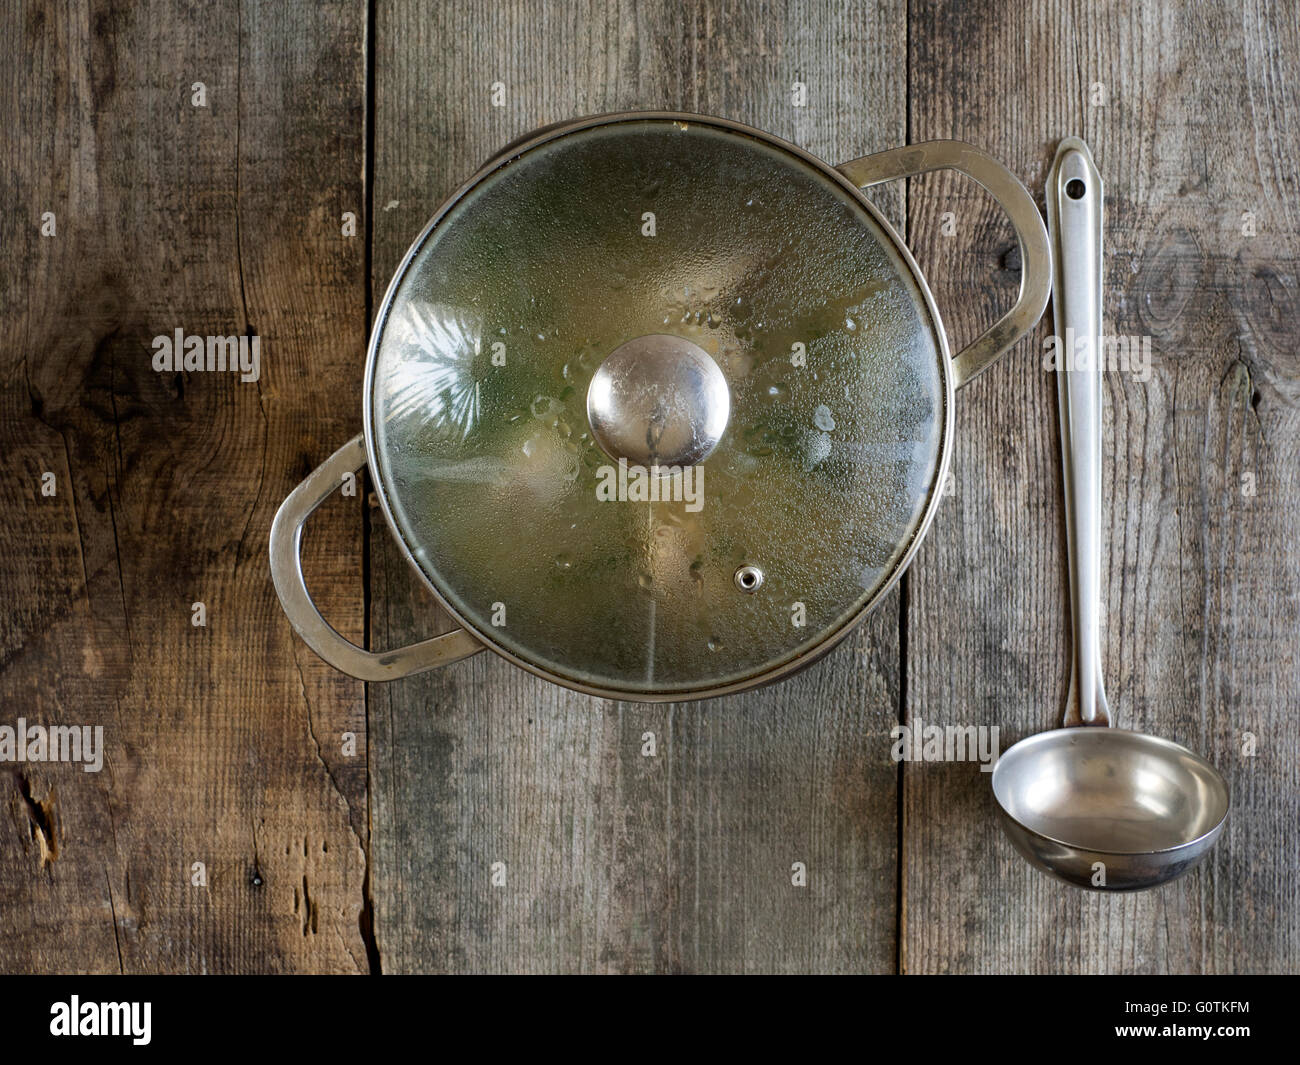 Saucepan of chicken soup with ladle on wooden table Stock Photo